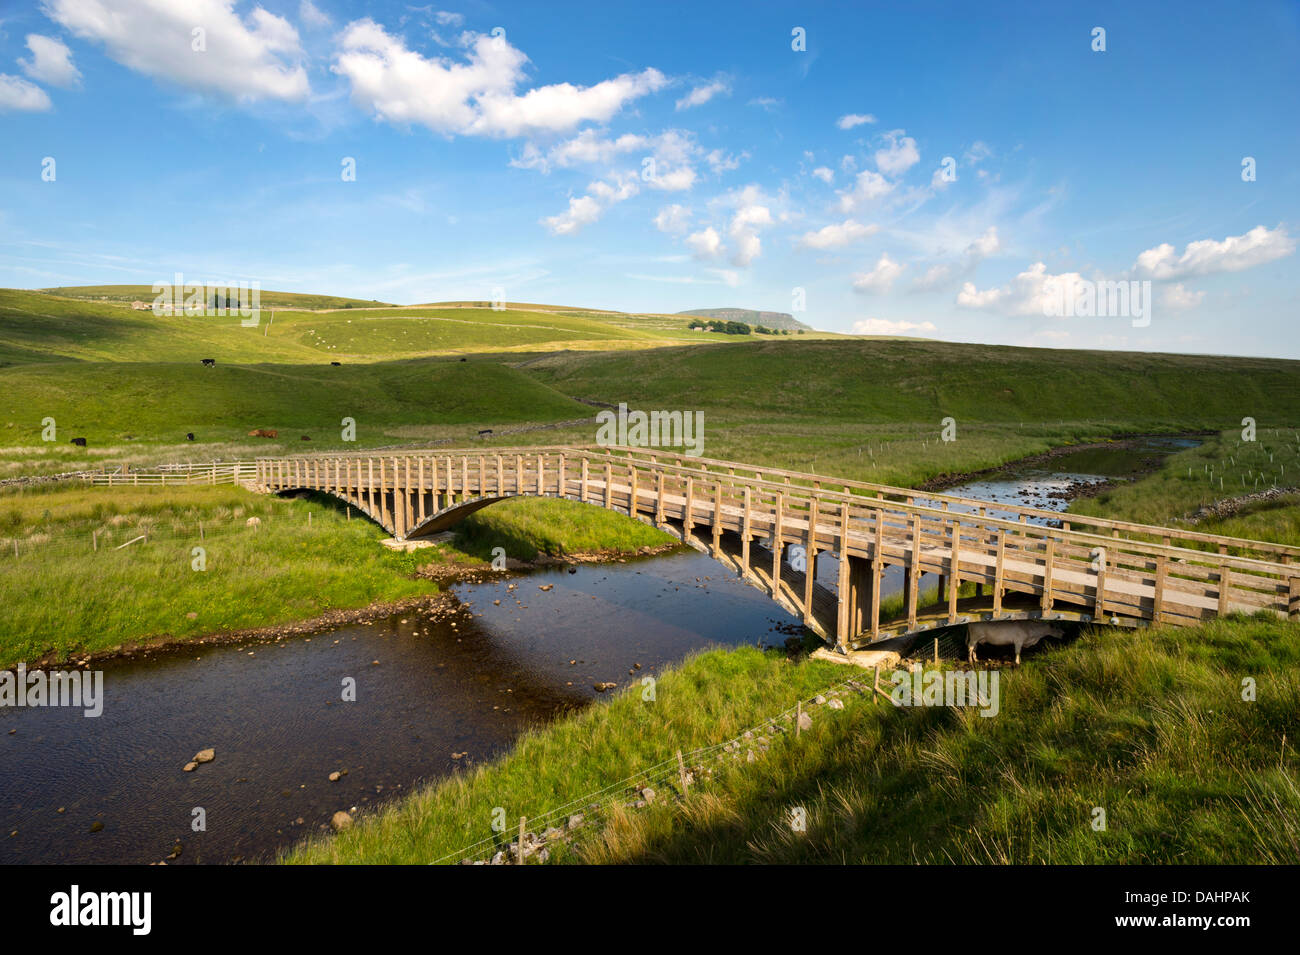 The award winning Far Moor Bridge over the River Ribble, , Selside, Ribblesdale, on The Pennine Bridleway National Trail, UK Stock Photo